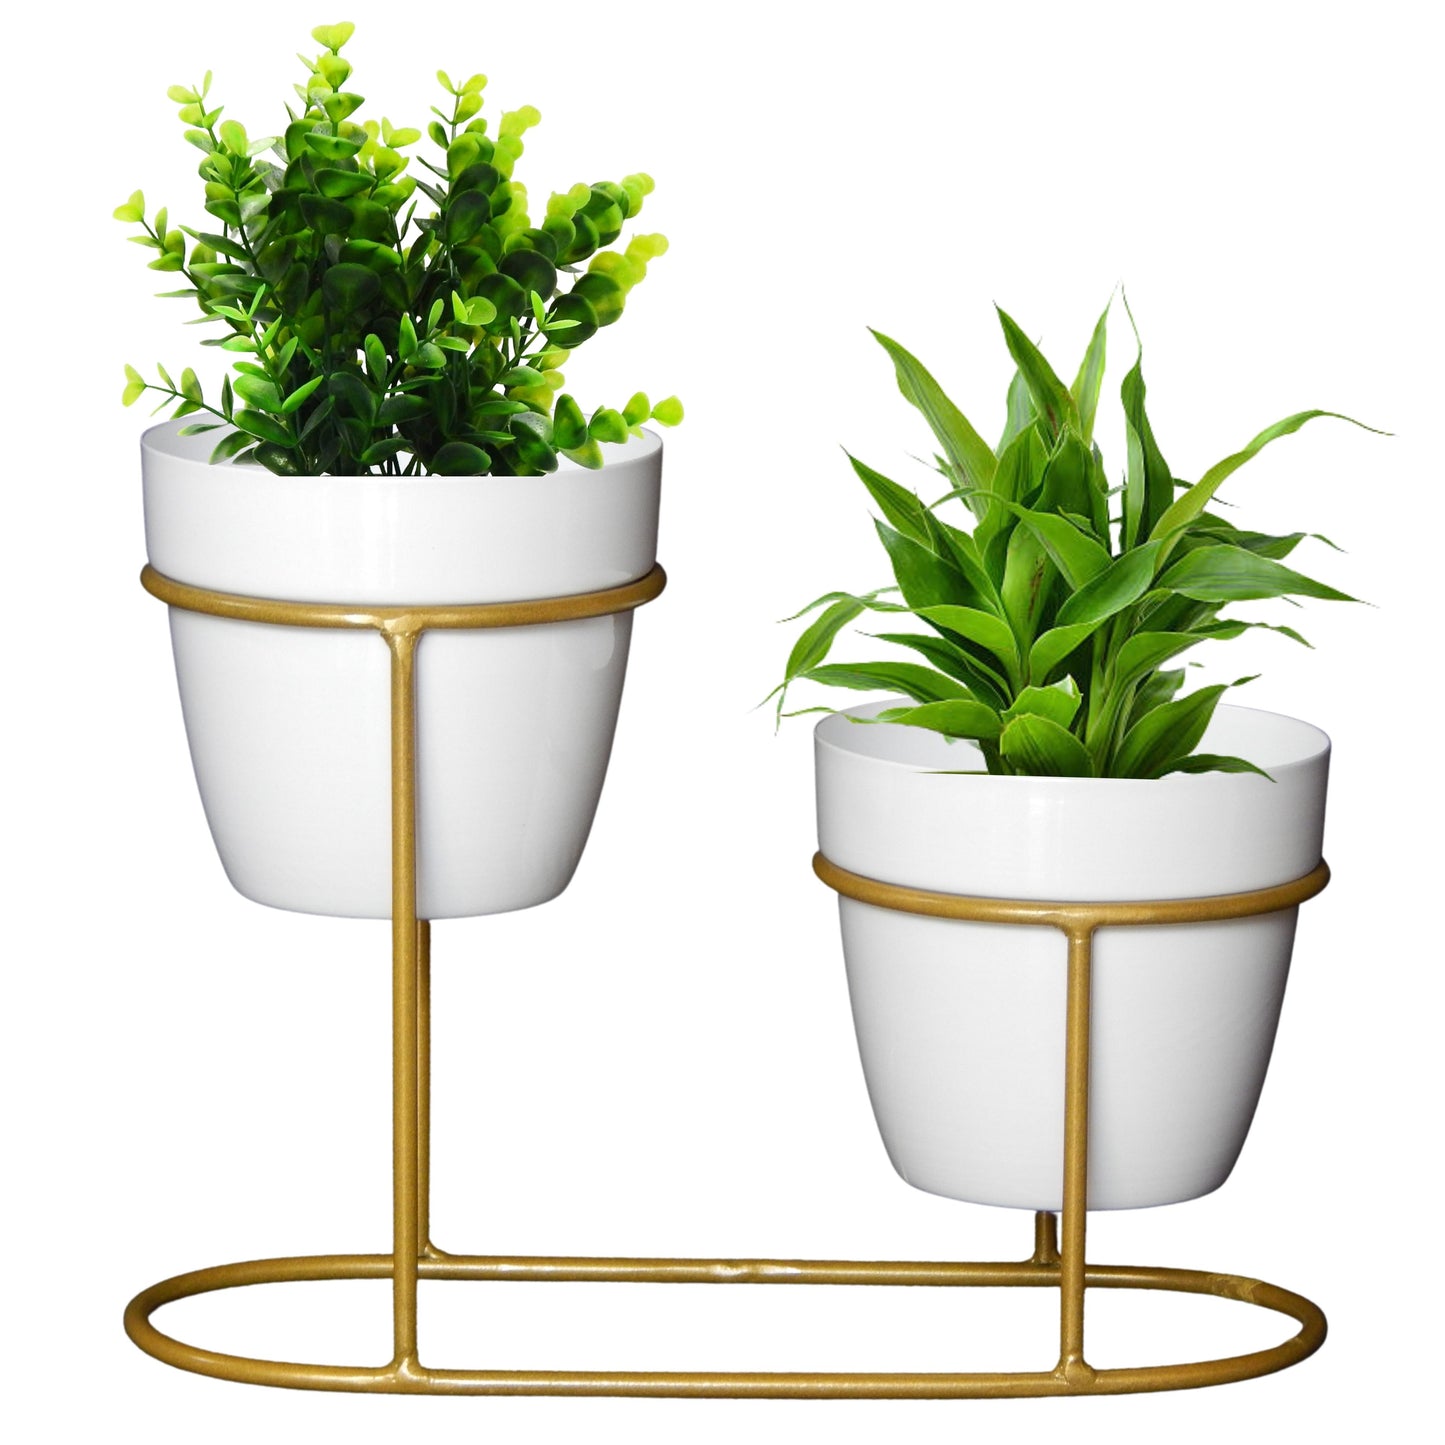 Chloe White Metal Pot with Stand